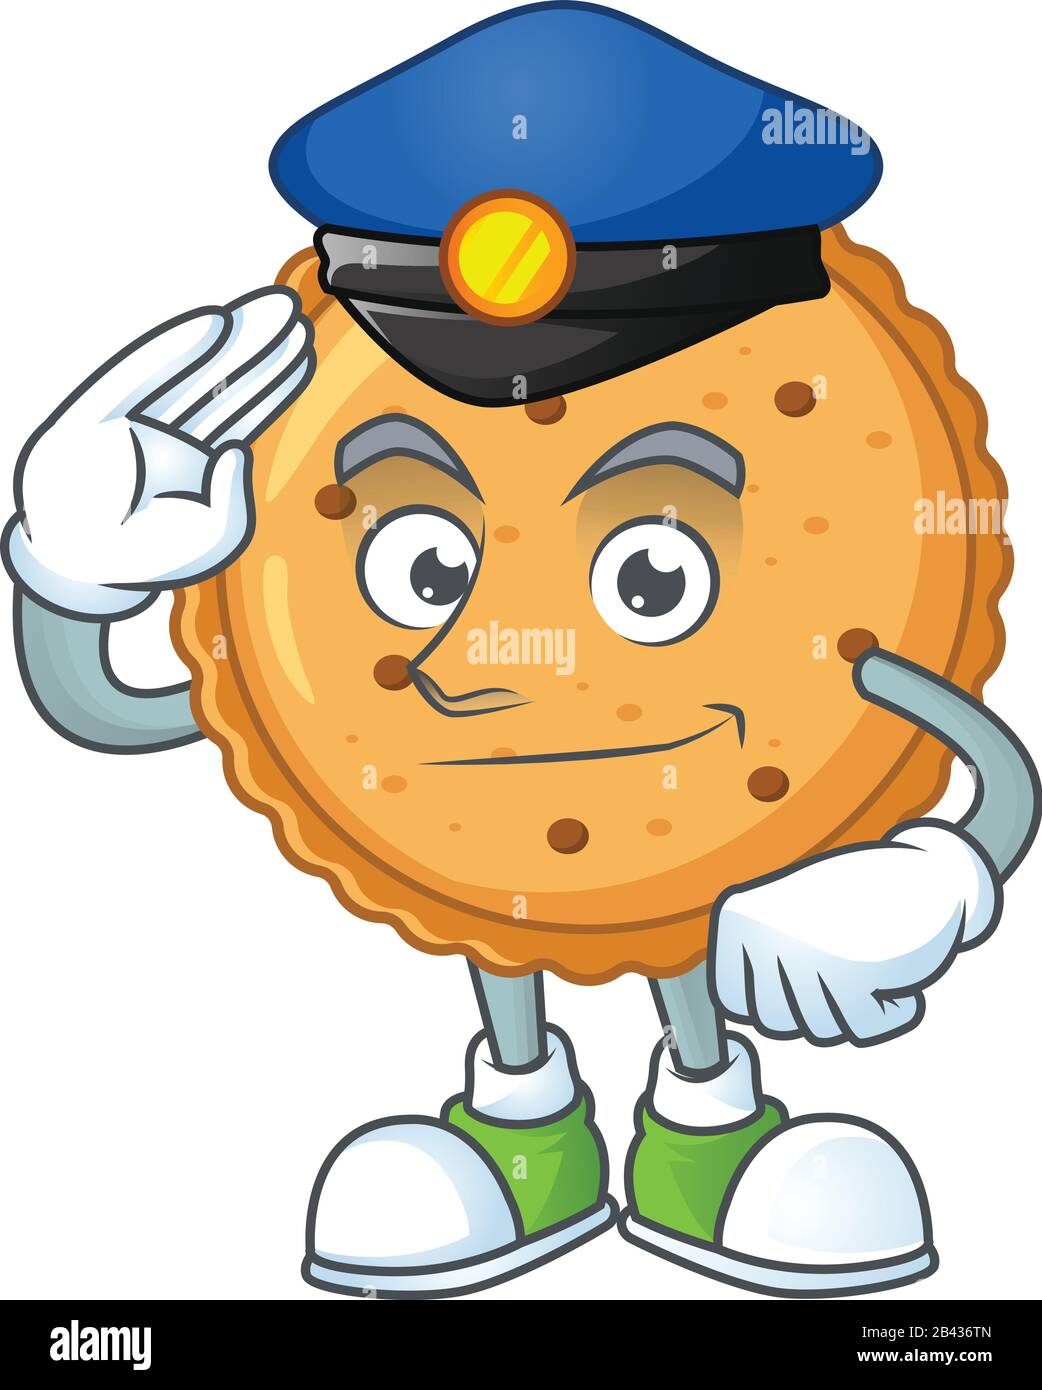 A character design of peanut butter cookies working as a Police officer Stock Vector